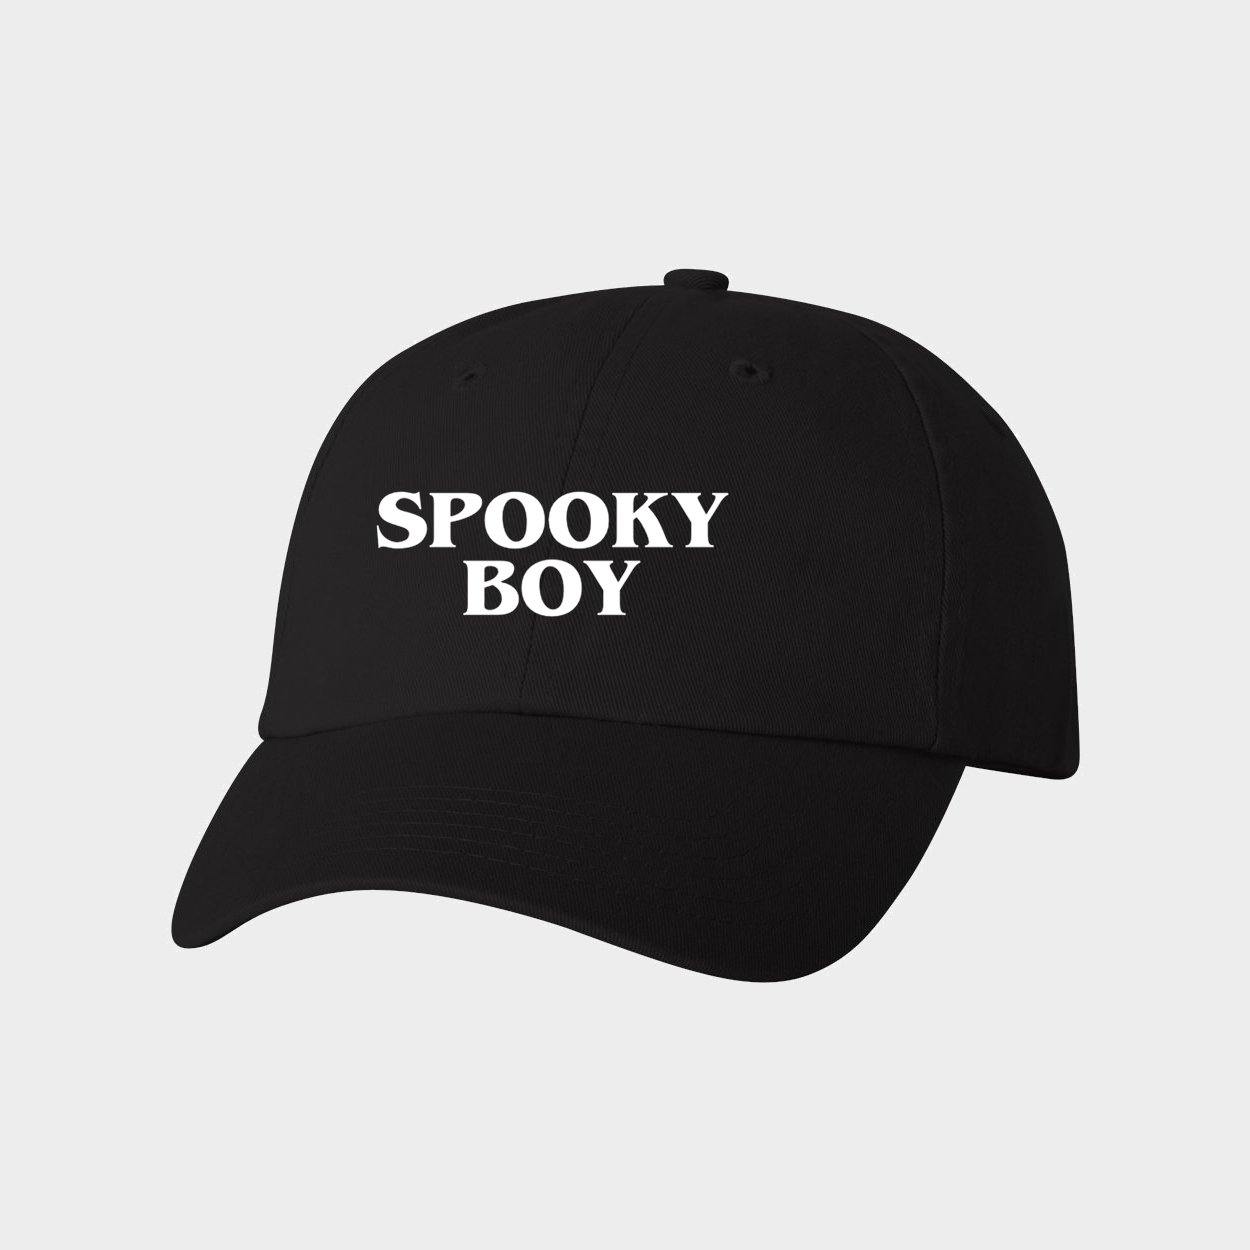 Spooky Boy Canvas Baseball Hat for Adults - Baby Teith